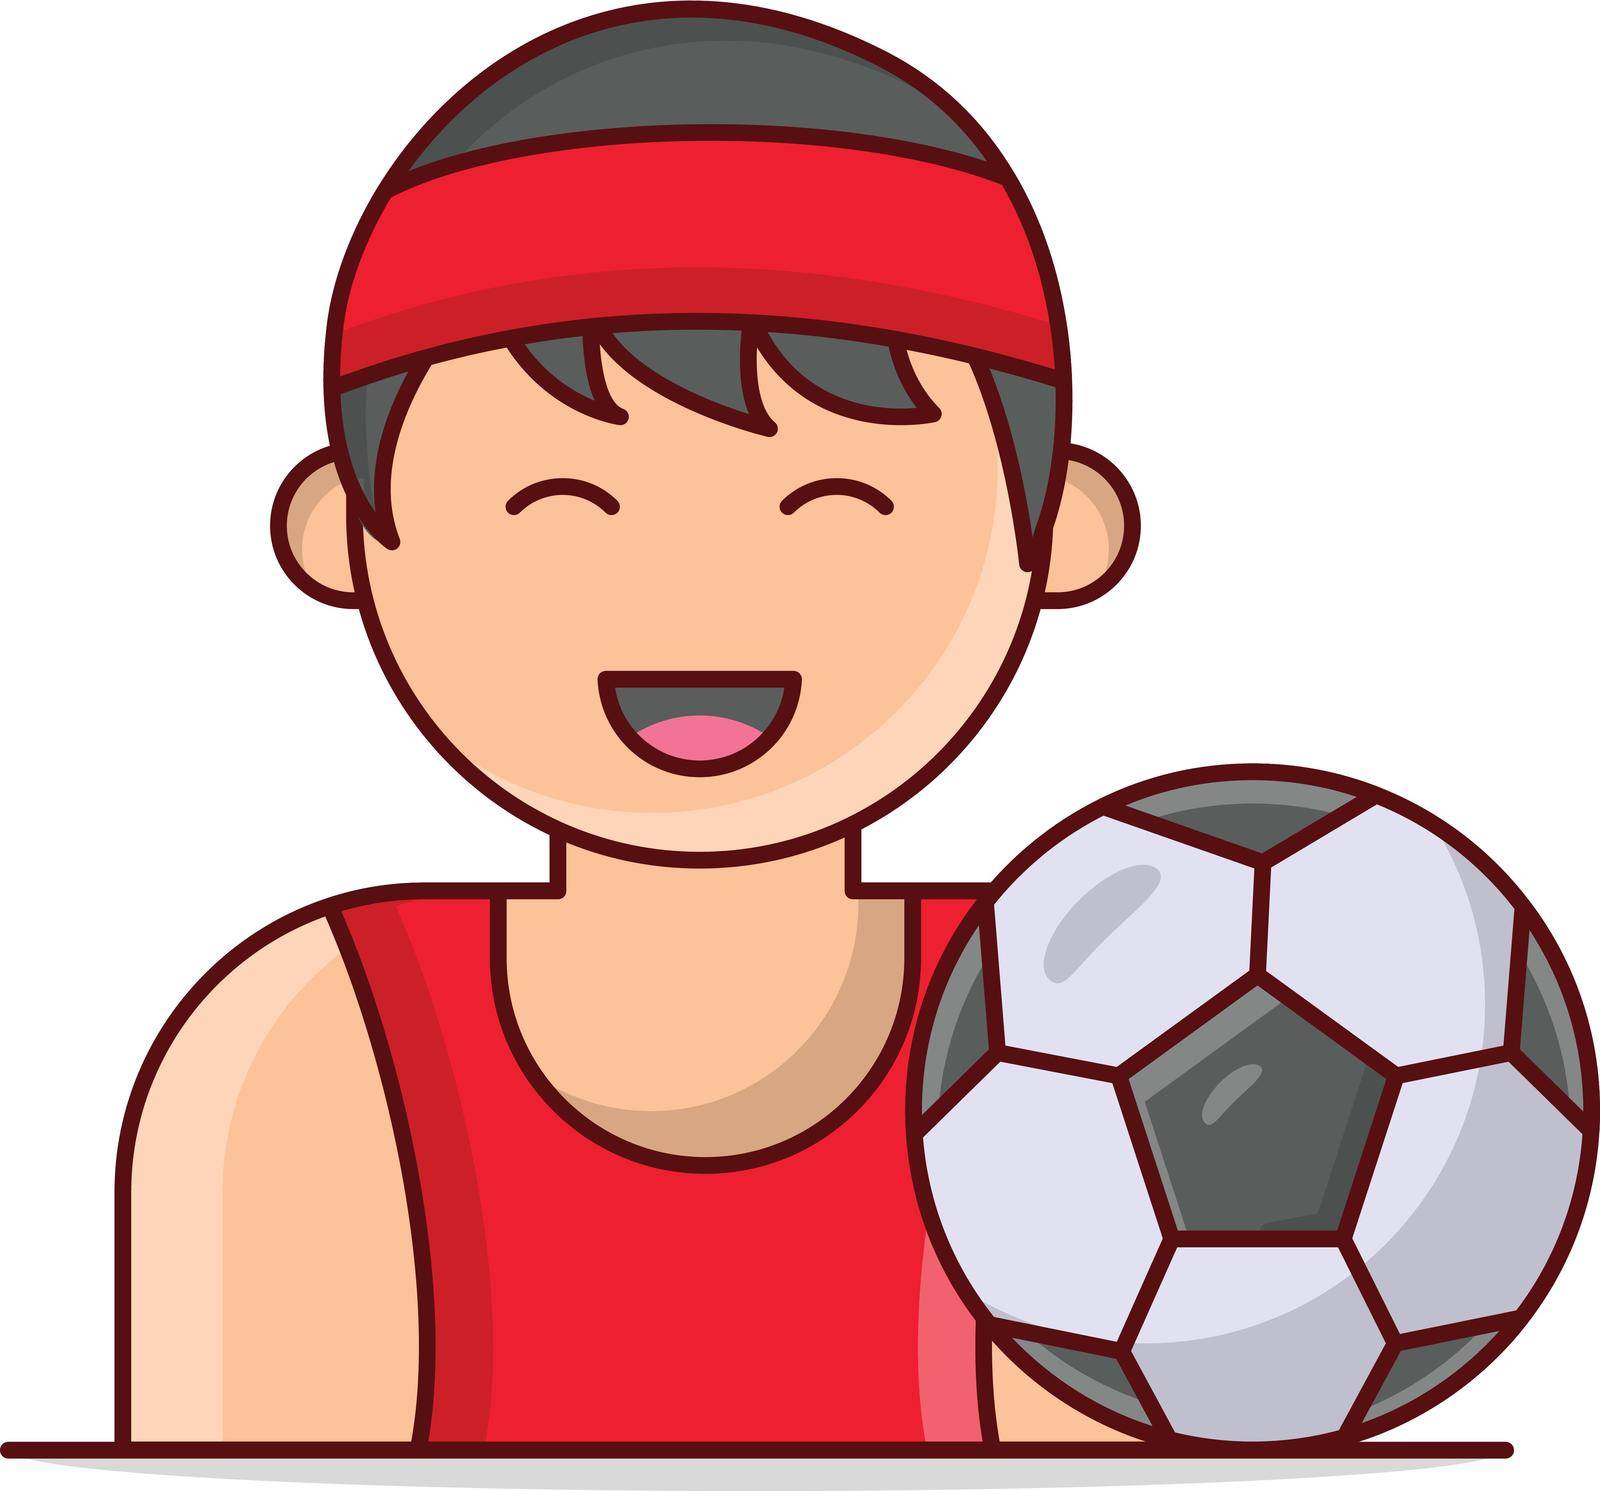 player by FlaticonsDesign